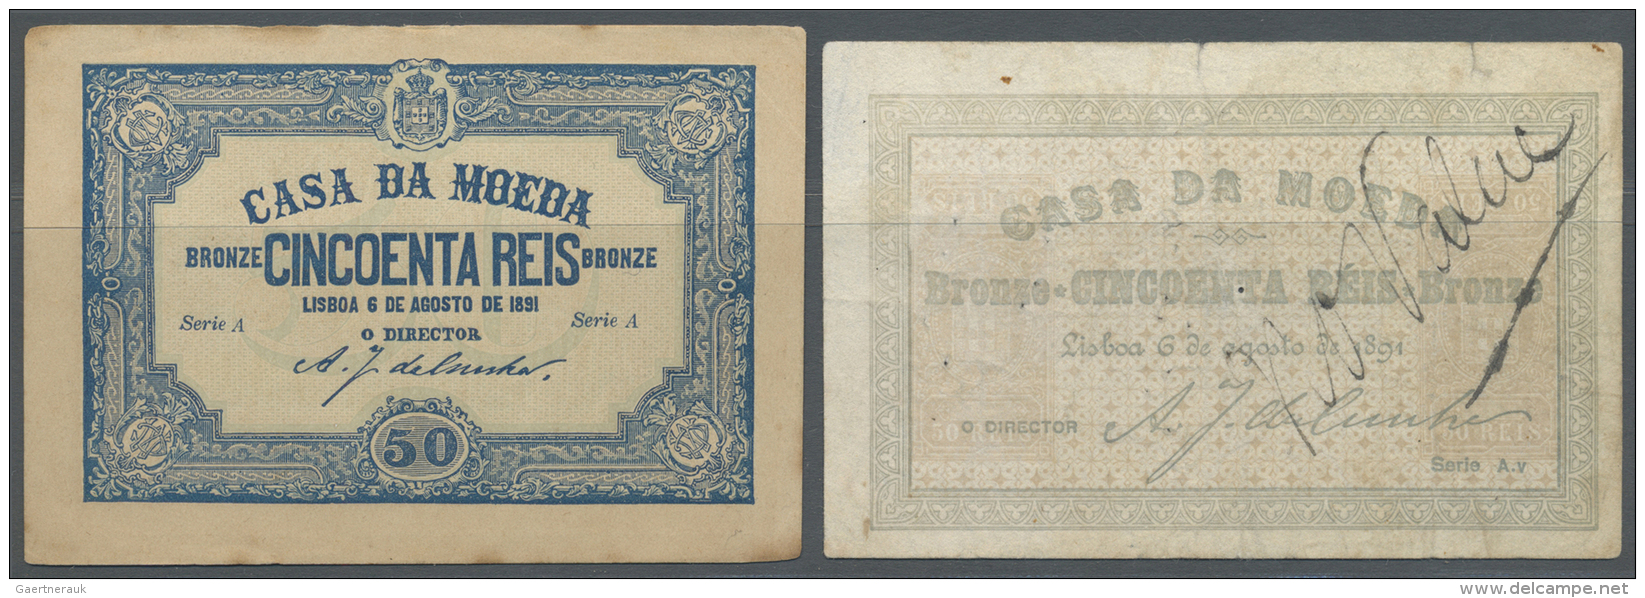 Portugal: Set Of 2 Notes Containing 50 Reis 1891 P. 86 (F) And 50 Reis 1891 P. 87 (XF), Nice Set. (2 Pcs) - Portugal